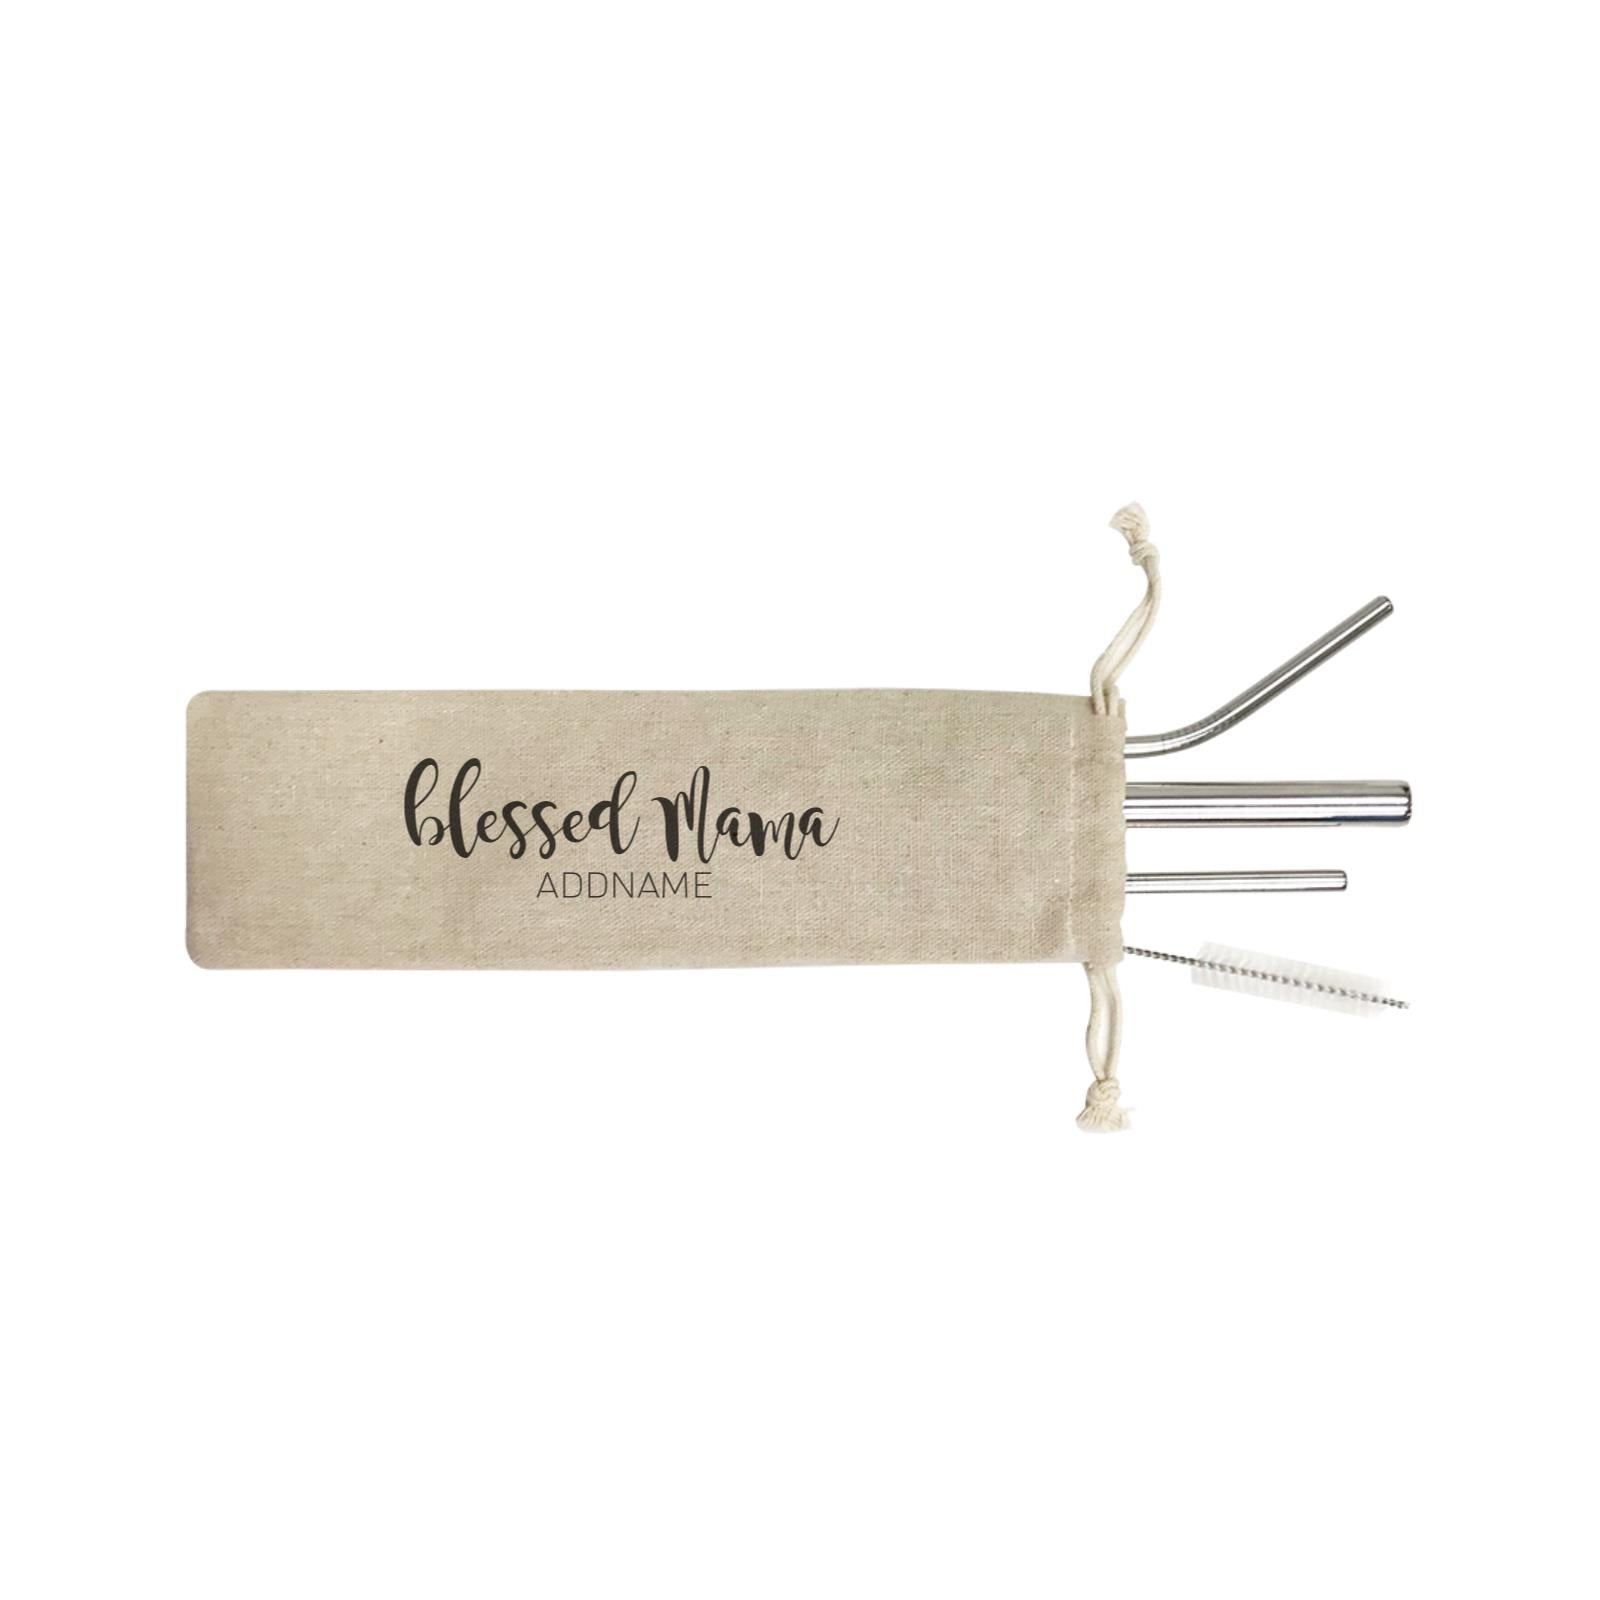 Blessed Mama Addname SB 4-In-1 Stainless Steel Straw Set in Satchel